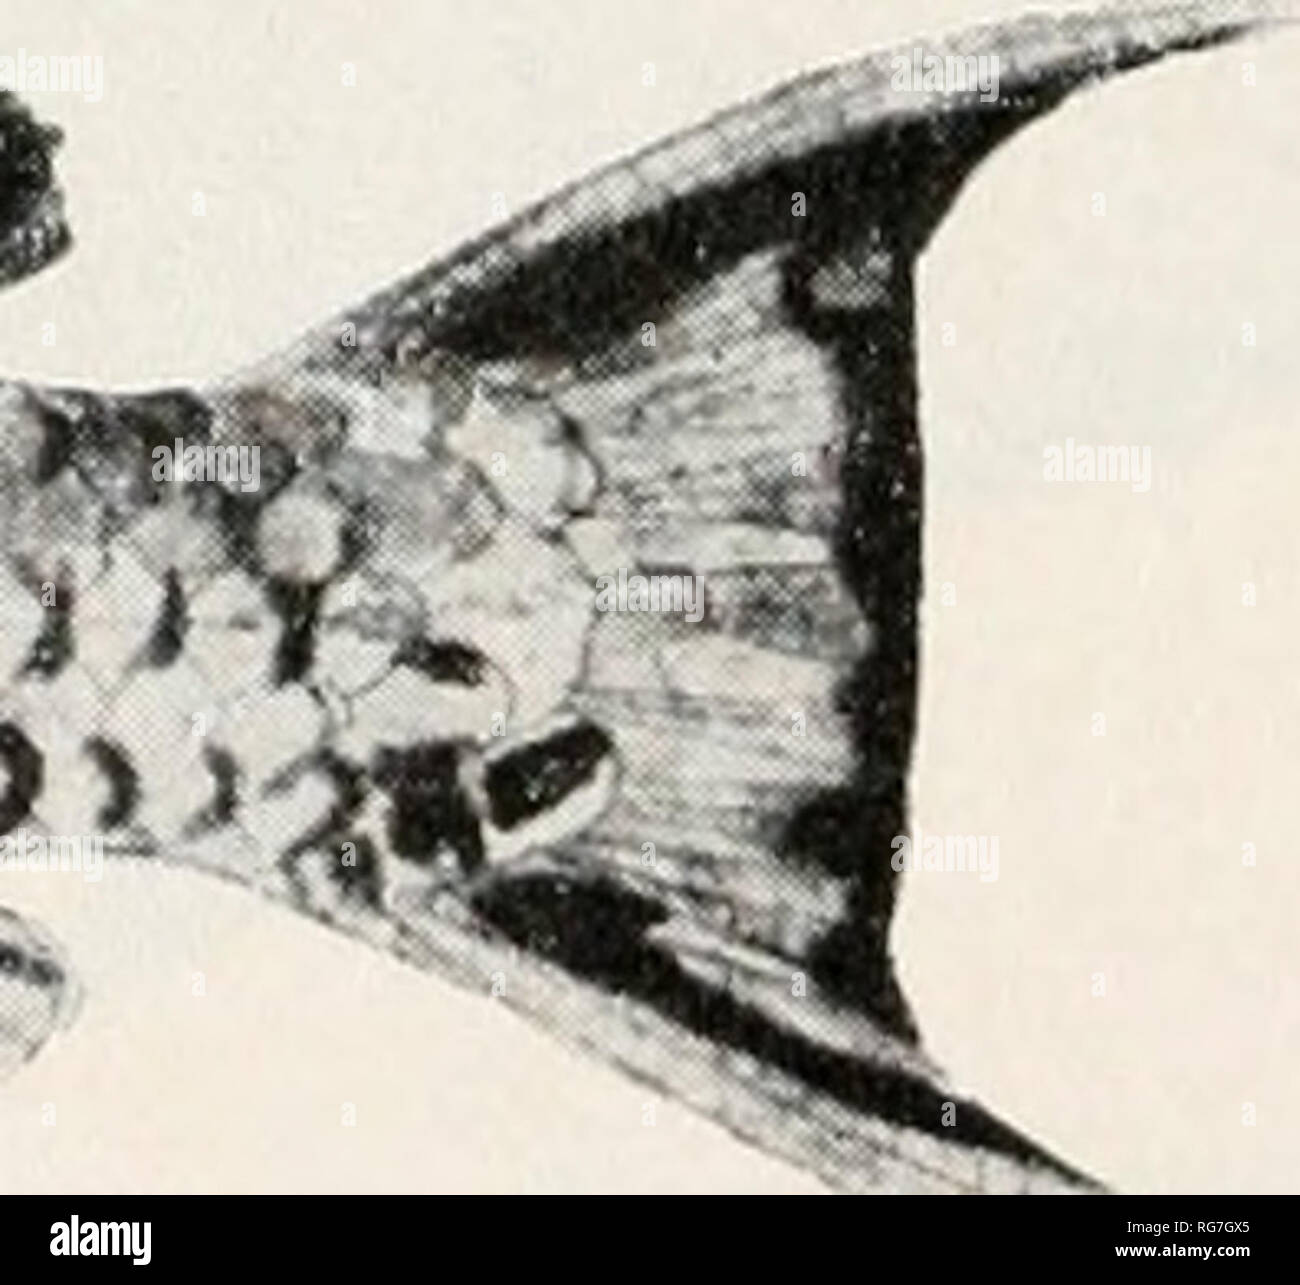 . Bulletin - United States National Museum. Science. A Scarus scaber, after C. zonularis Jordan and Scale (Bull. U. S. Bur. Fish., vol. 25, fig. 60, 1906); B, S. oviceps, after Kodachrome by John Randall; C, S. niger, photograph of Philip- pine Albatross color drawing; D, S. madagascariensis, after Steindachner (Sitzb. Akad. VViss. Wien , vol. 96, pt. 1, p. 61, pi. 2, fig. 1, 1887); E, S. africanus (Smith), after J. L. B. Smith (Mem. Mus. Dr. Alvaro de Castro, No. 3, fig. 26, 1955).. Please note that these images are extracted from scanned page images that may have been digitally enhanced for  Stock Photo